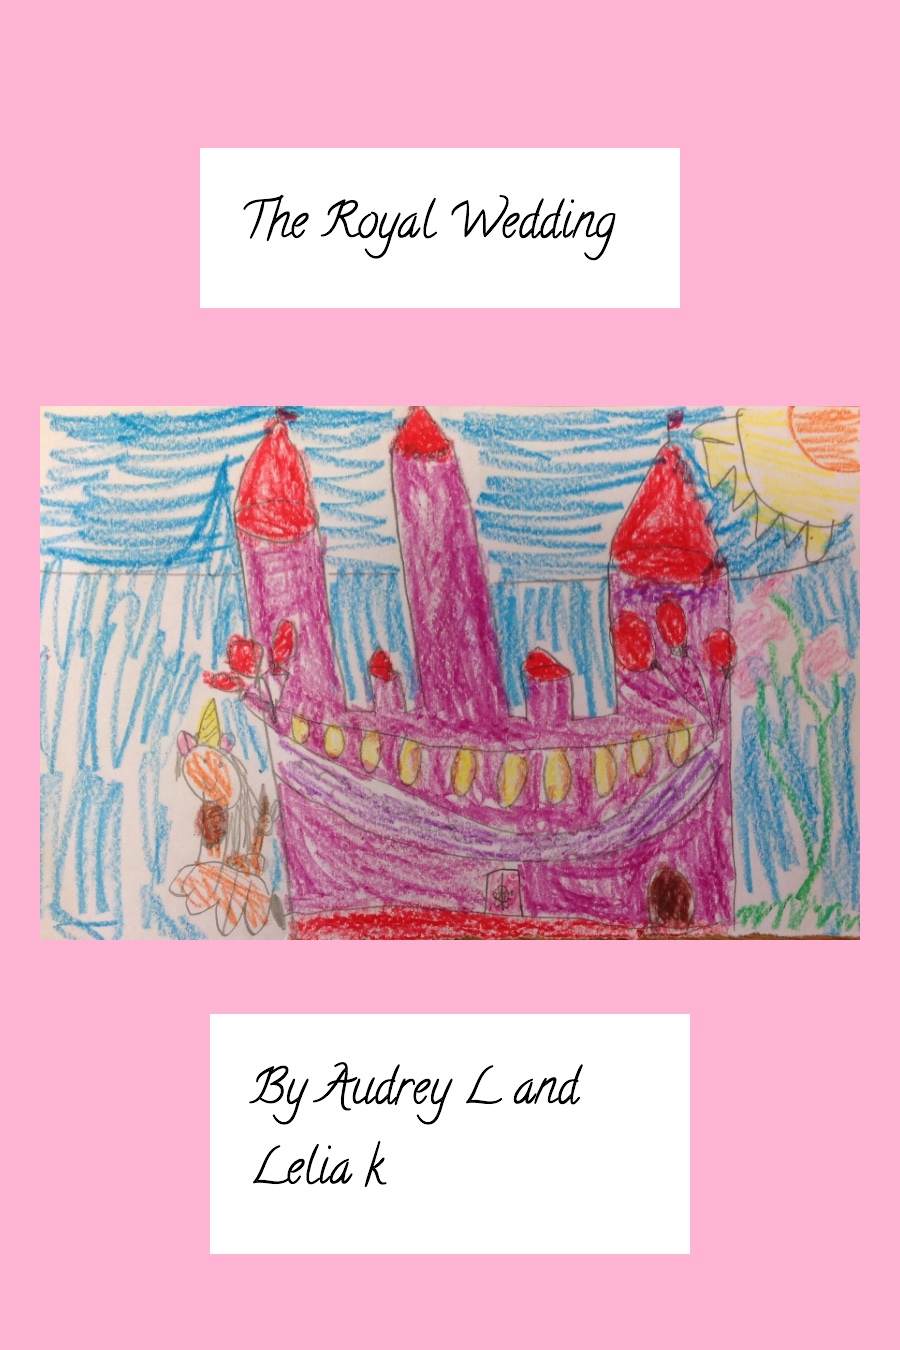 The Royal Wedding by Leila K and Audrey L